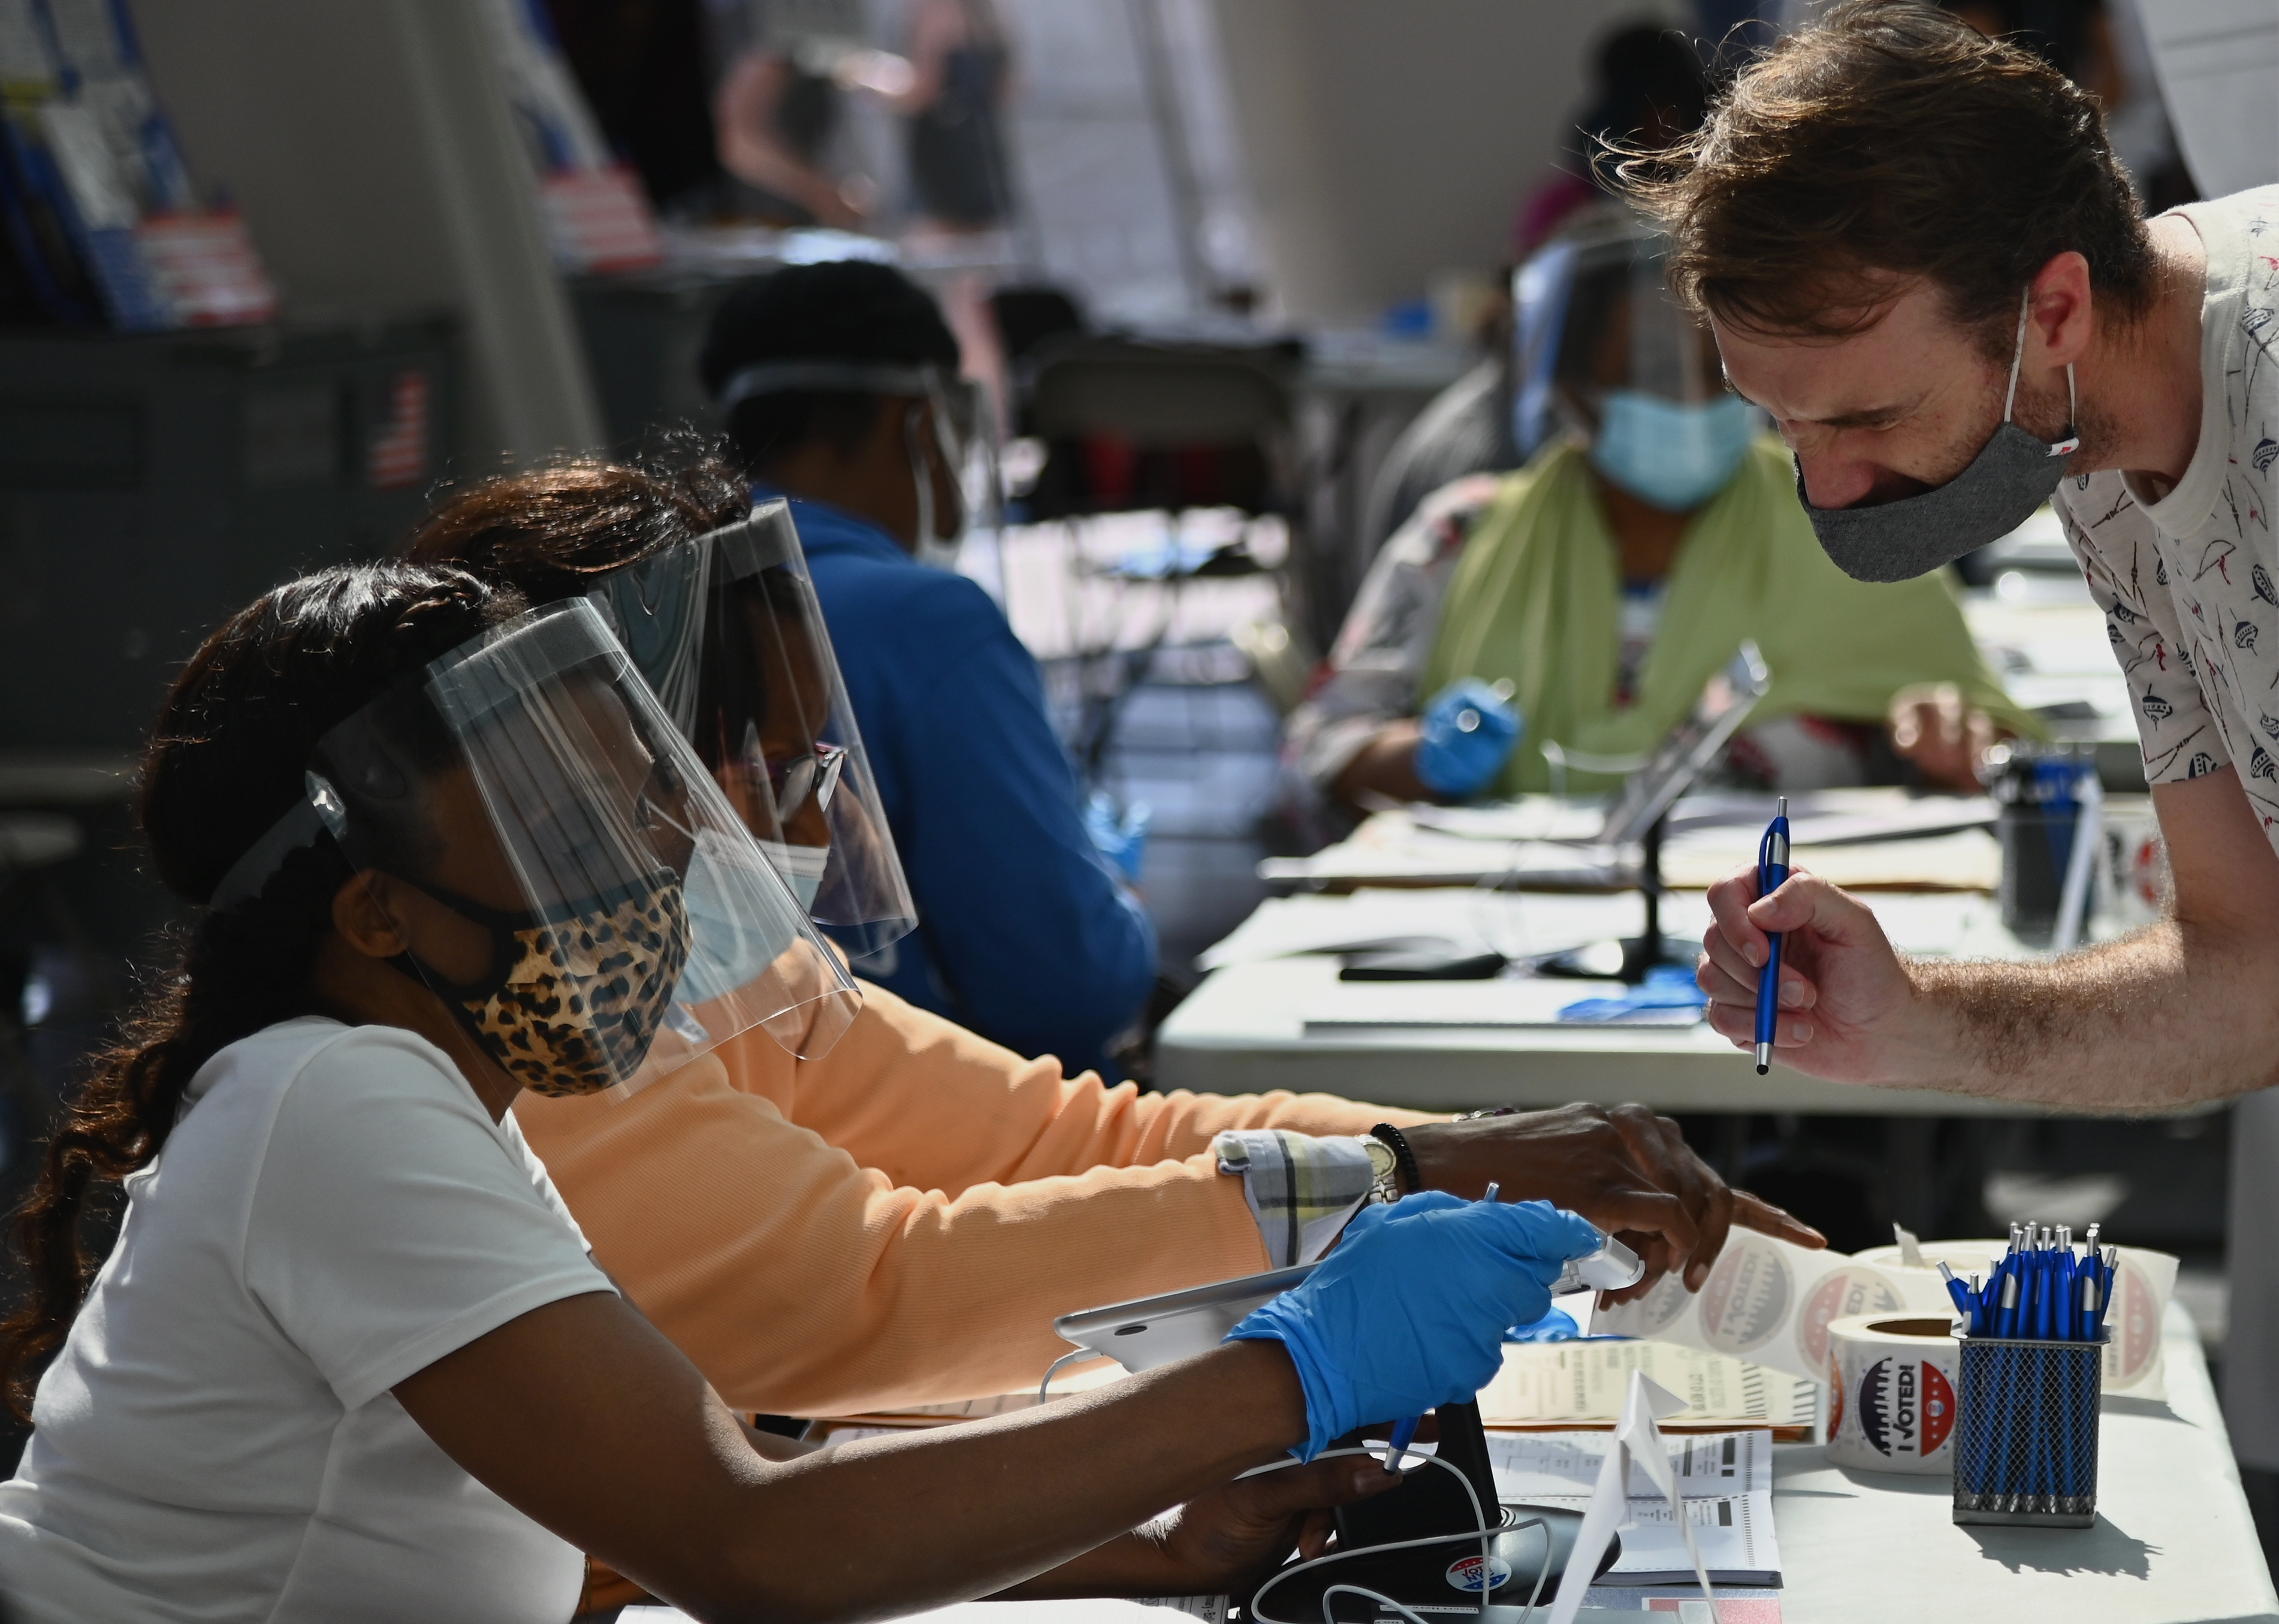 Board of Election employees and volunteers wearing PPE (personal protective equipment) assist voters during the New York Democratic presidential primary elections on June 23, 2020 in New York City. (Photo by Angela Weiss / AFP) (Photo by ANGELA WEISS/AFP via Getty Images)